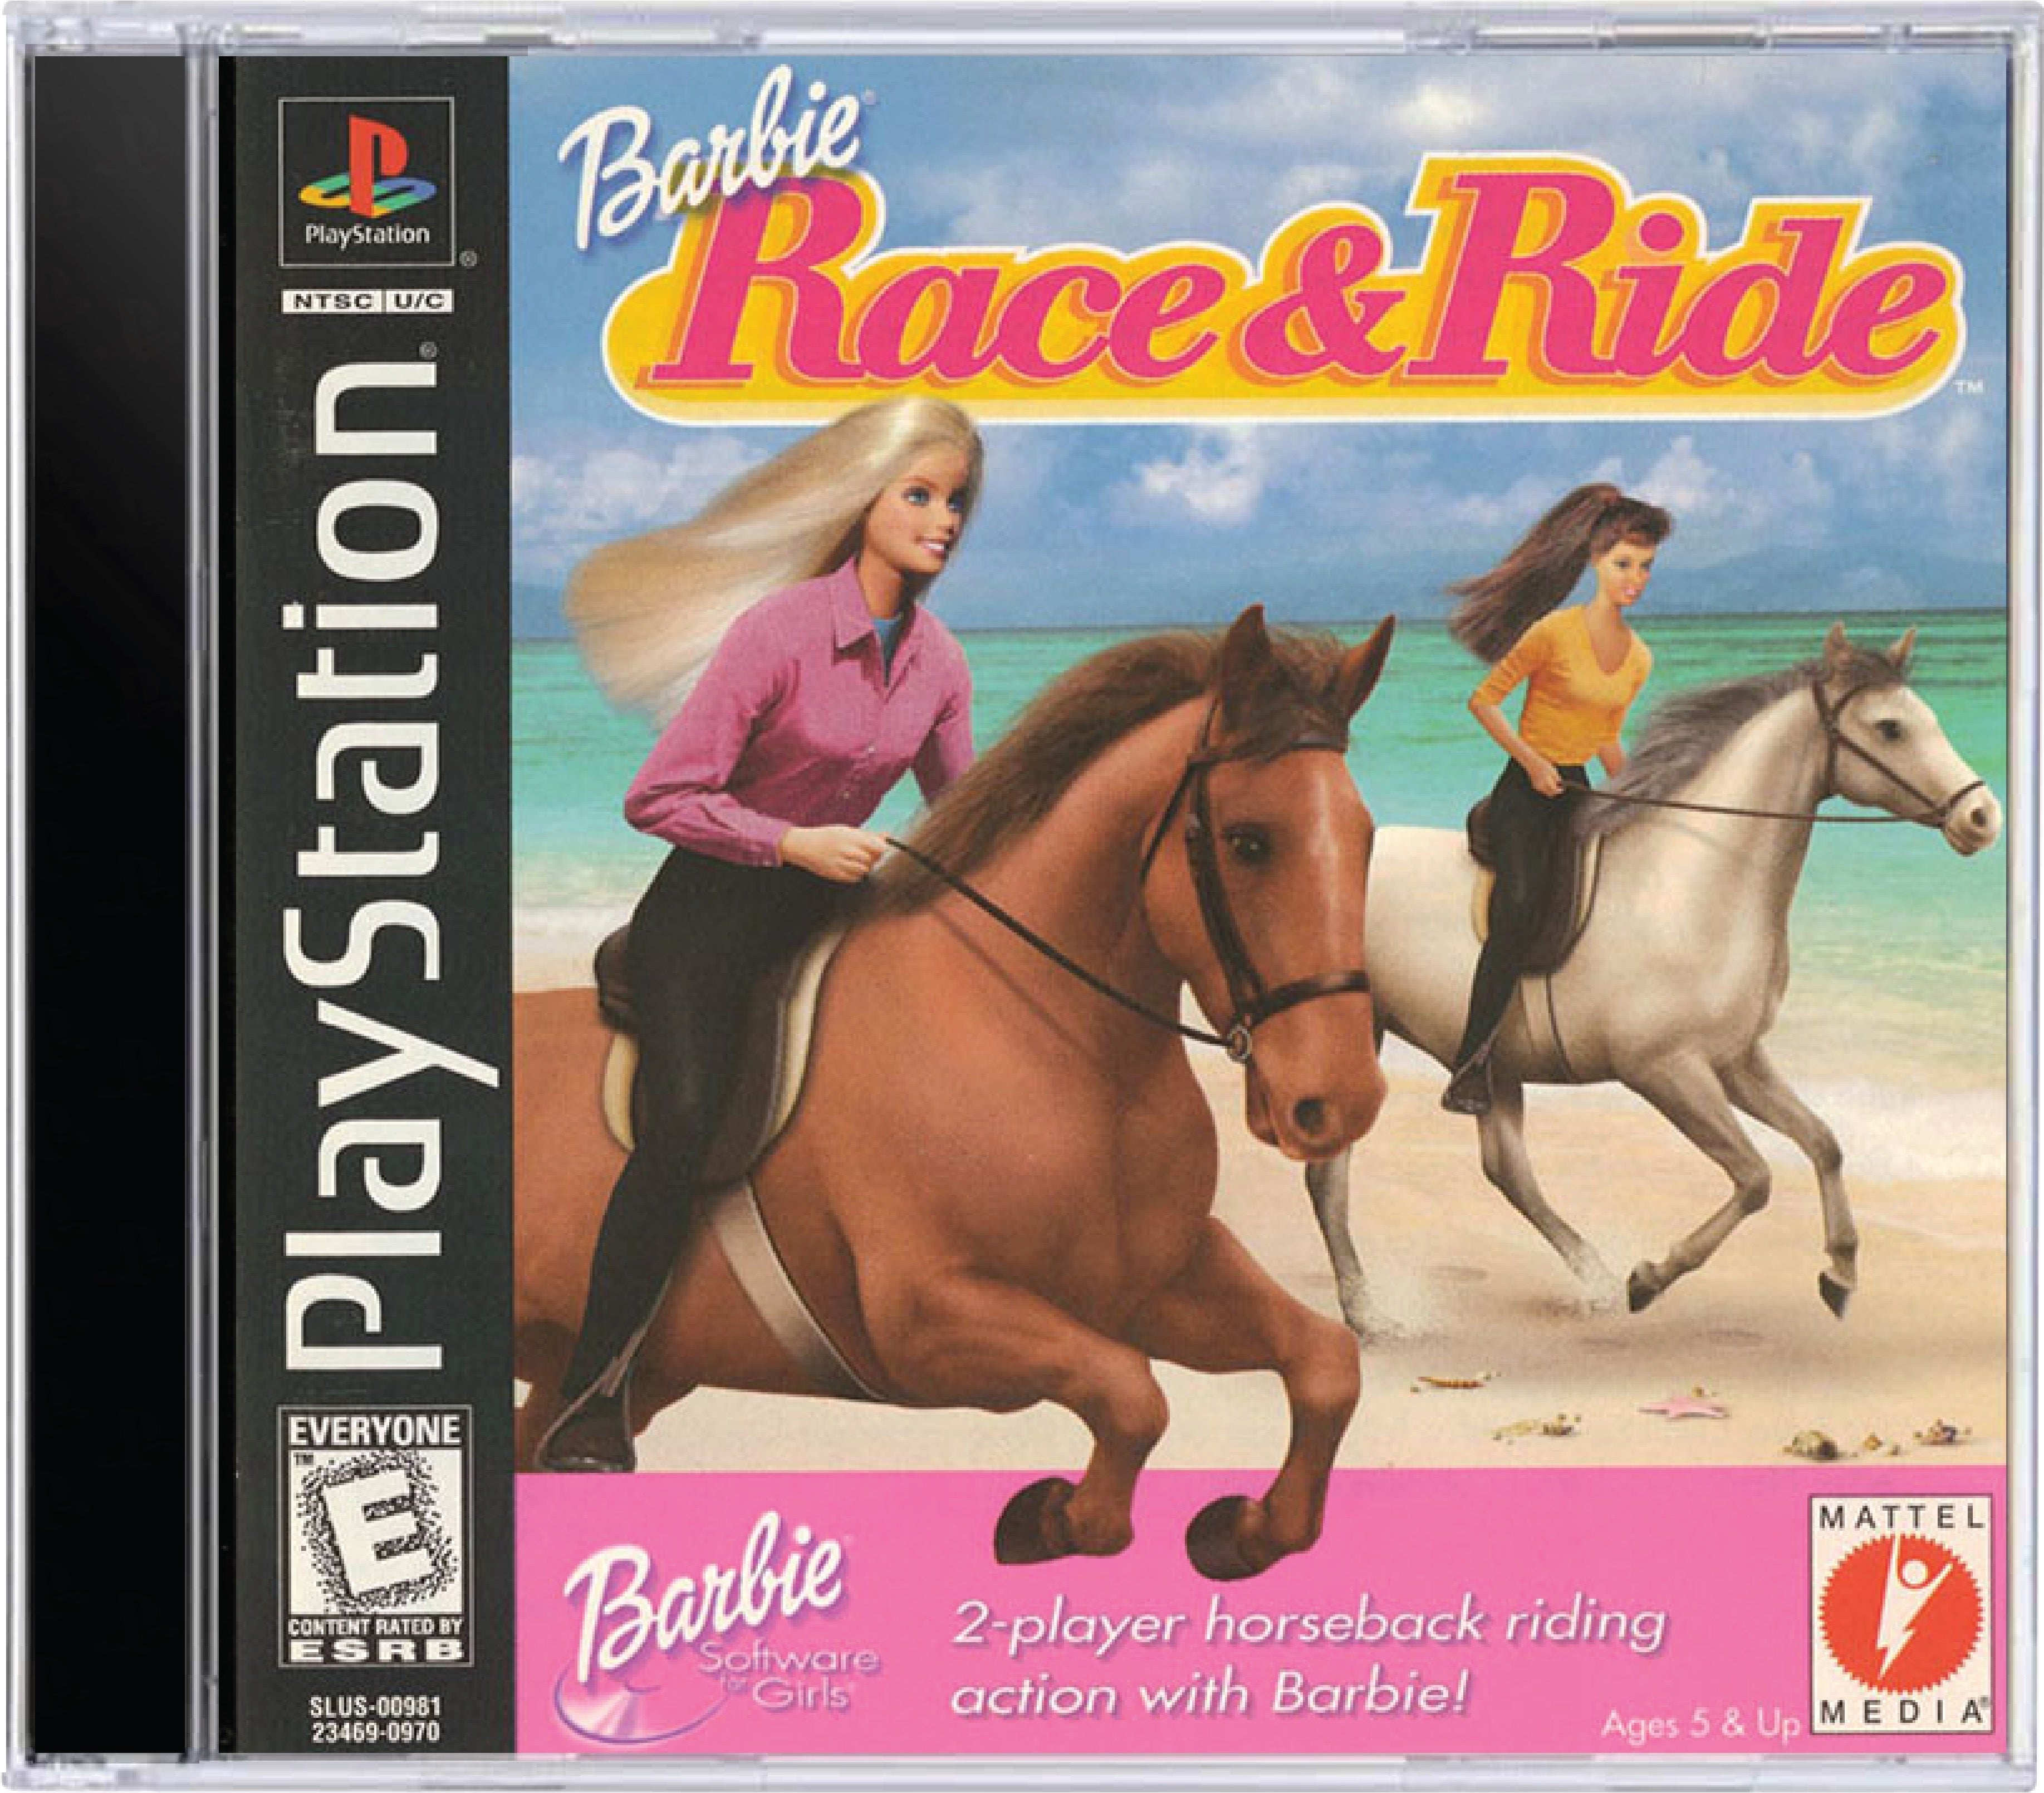 Barbie Race and Ride Cover Art and Product Photo